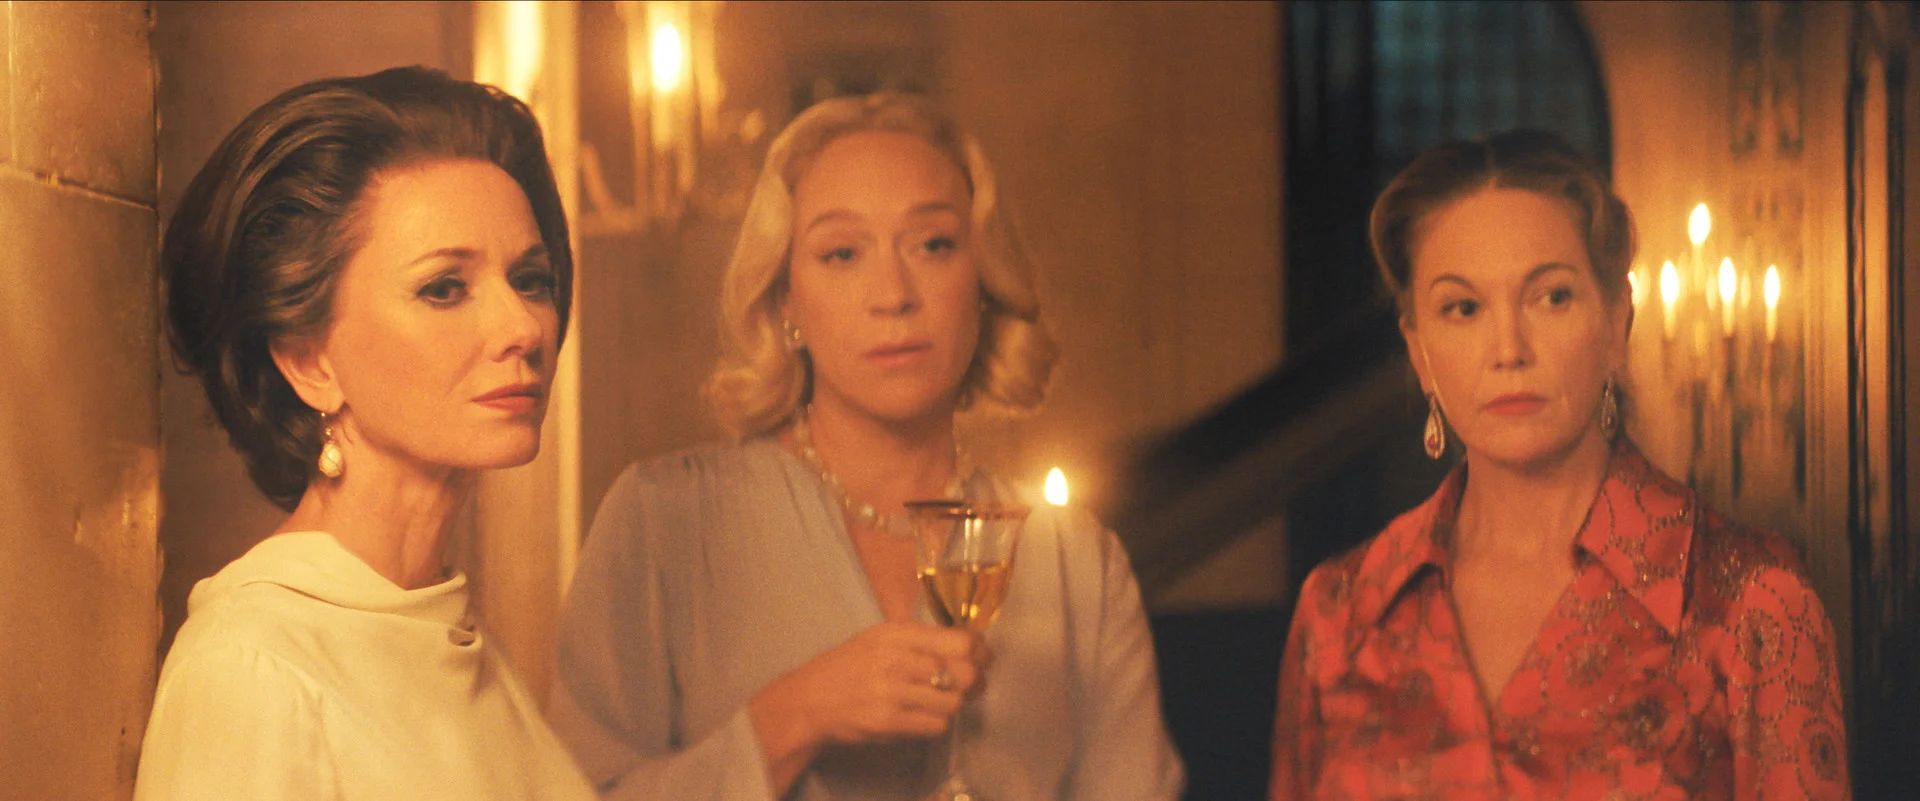 Naomi Watts, Chloë Sevigny, and Diane Lane in Feud: Capote vs The Swans. PHOTO: FX